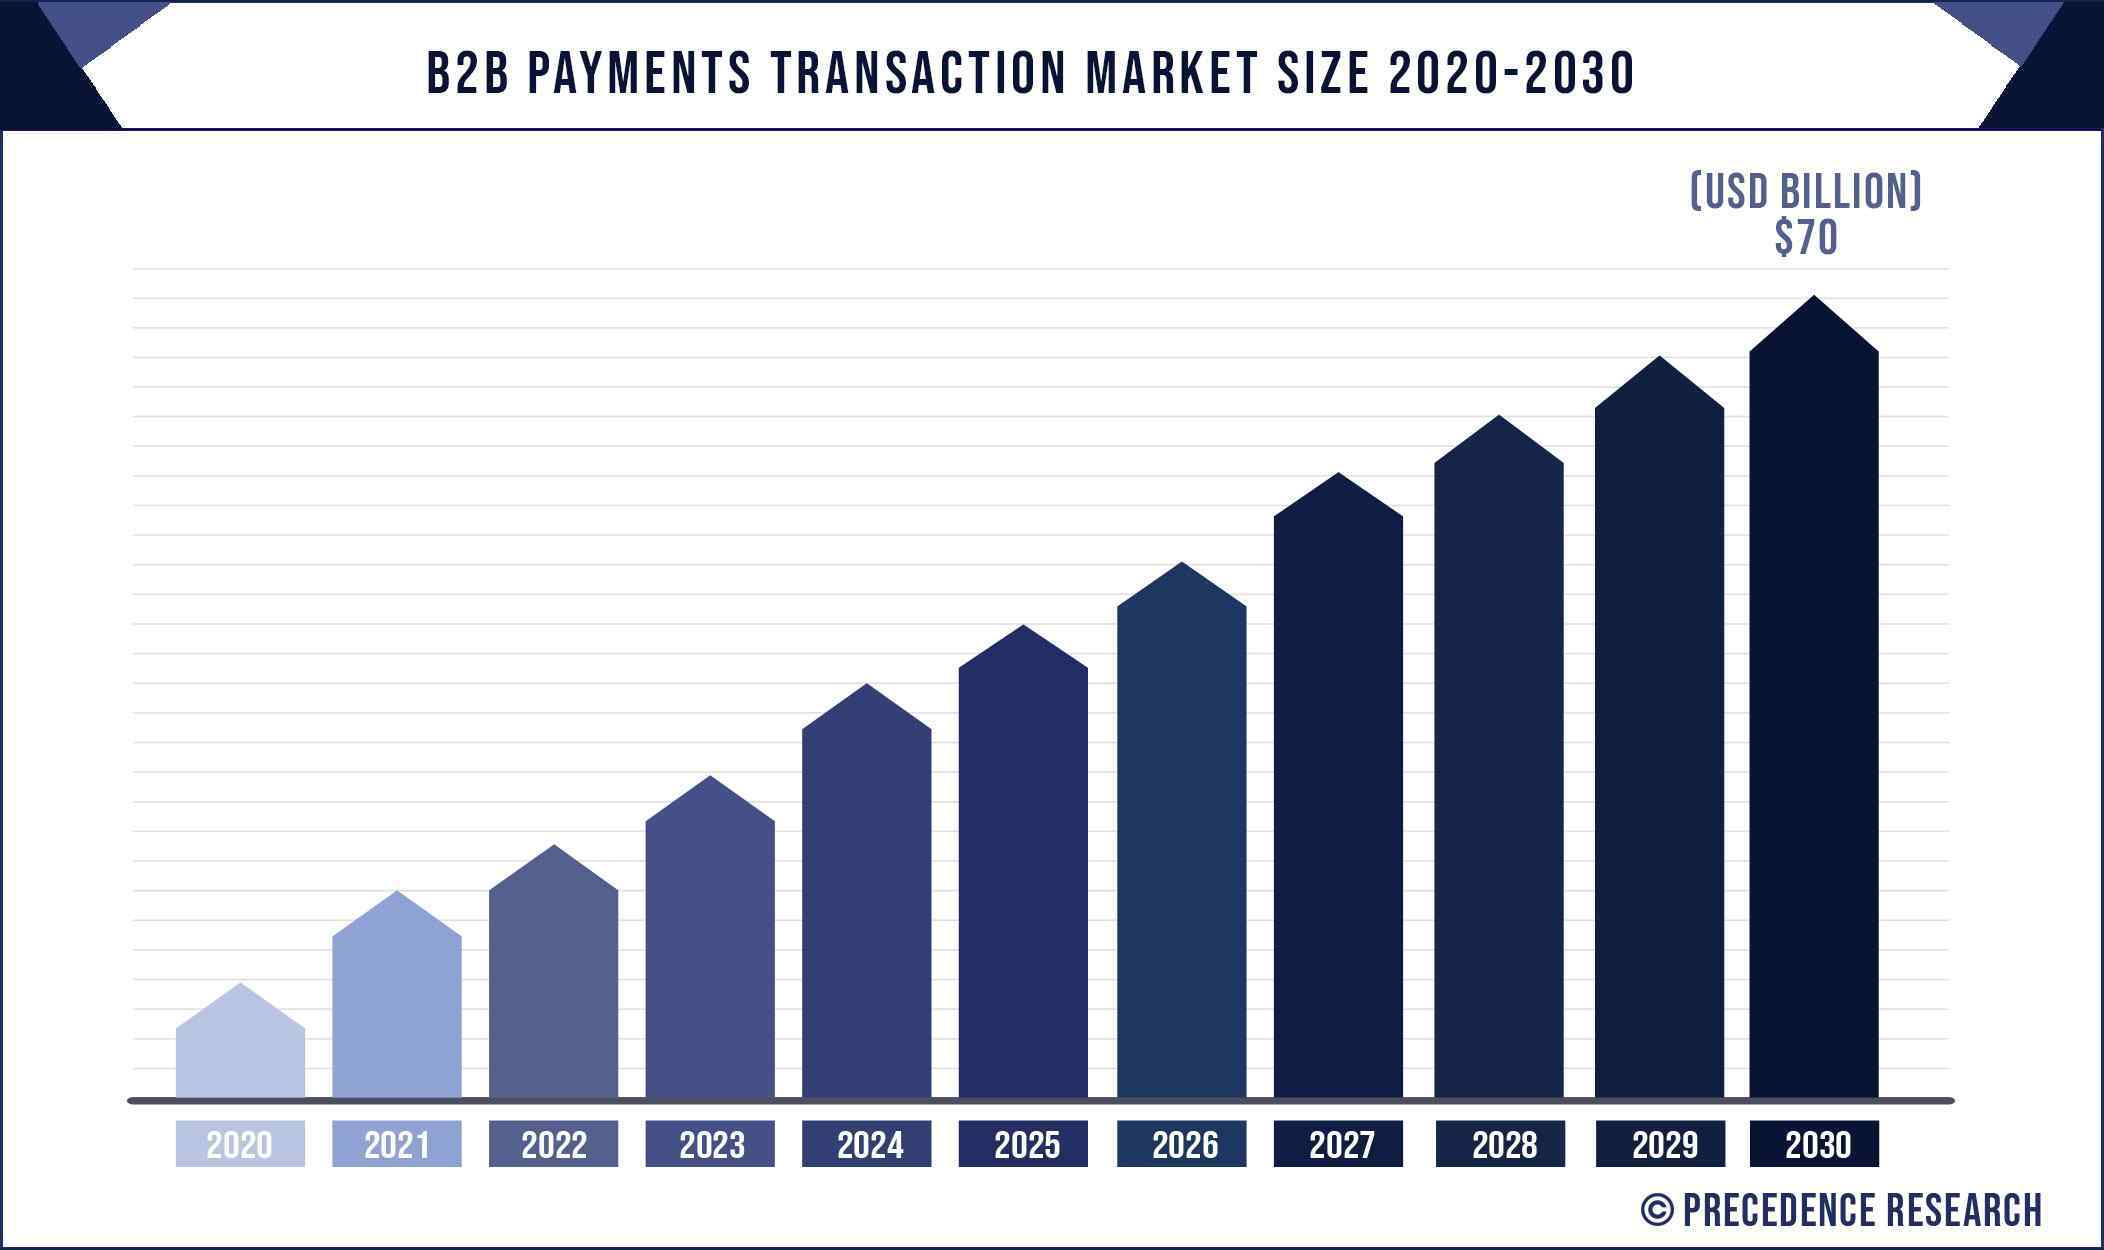 B2B Payments Transaction Market Size 2022 to 2030